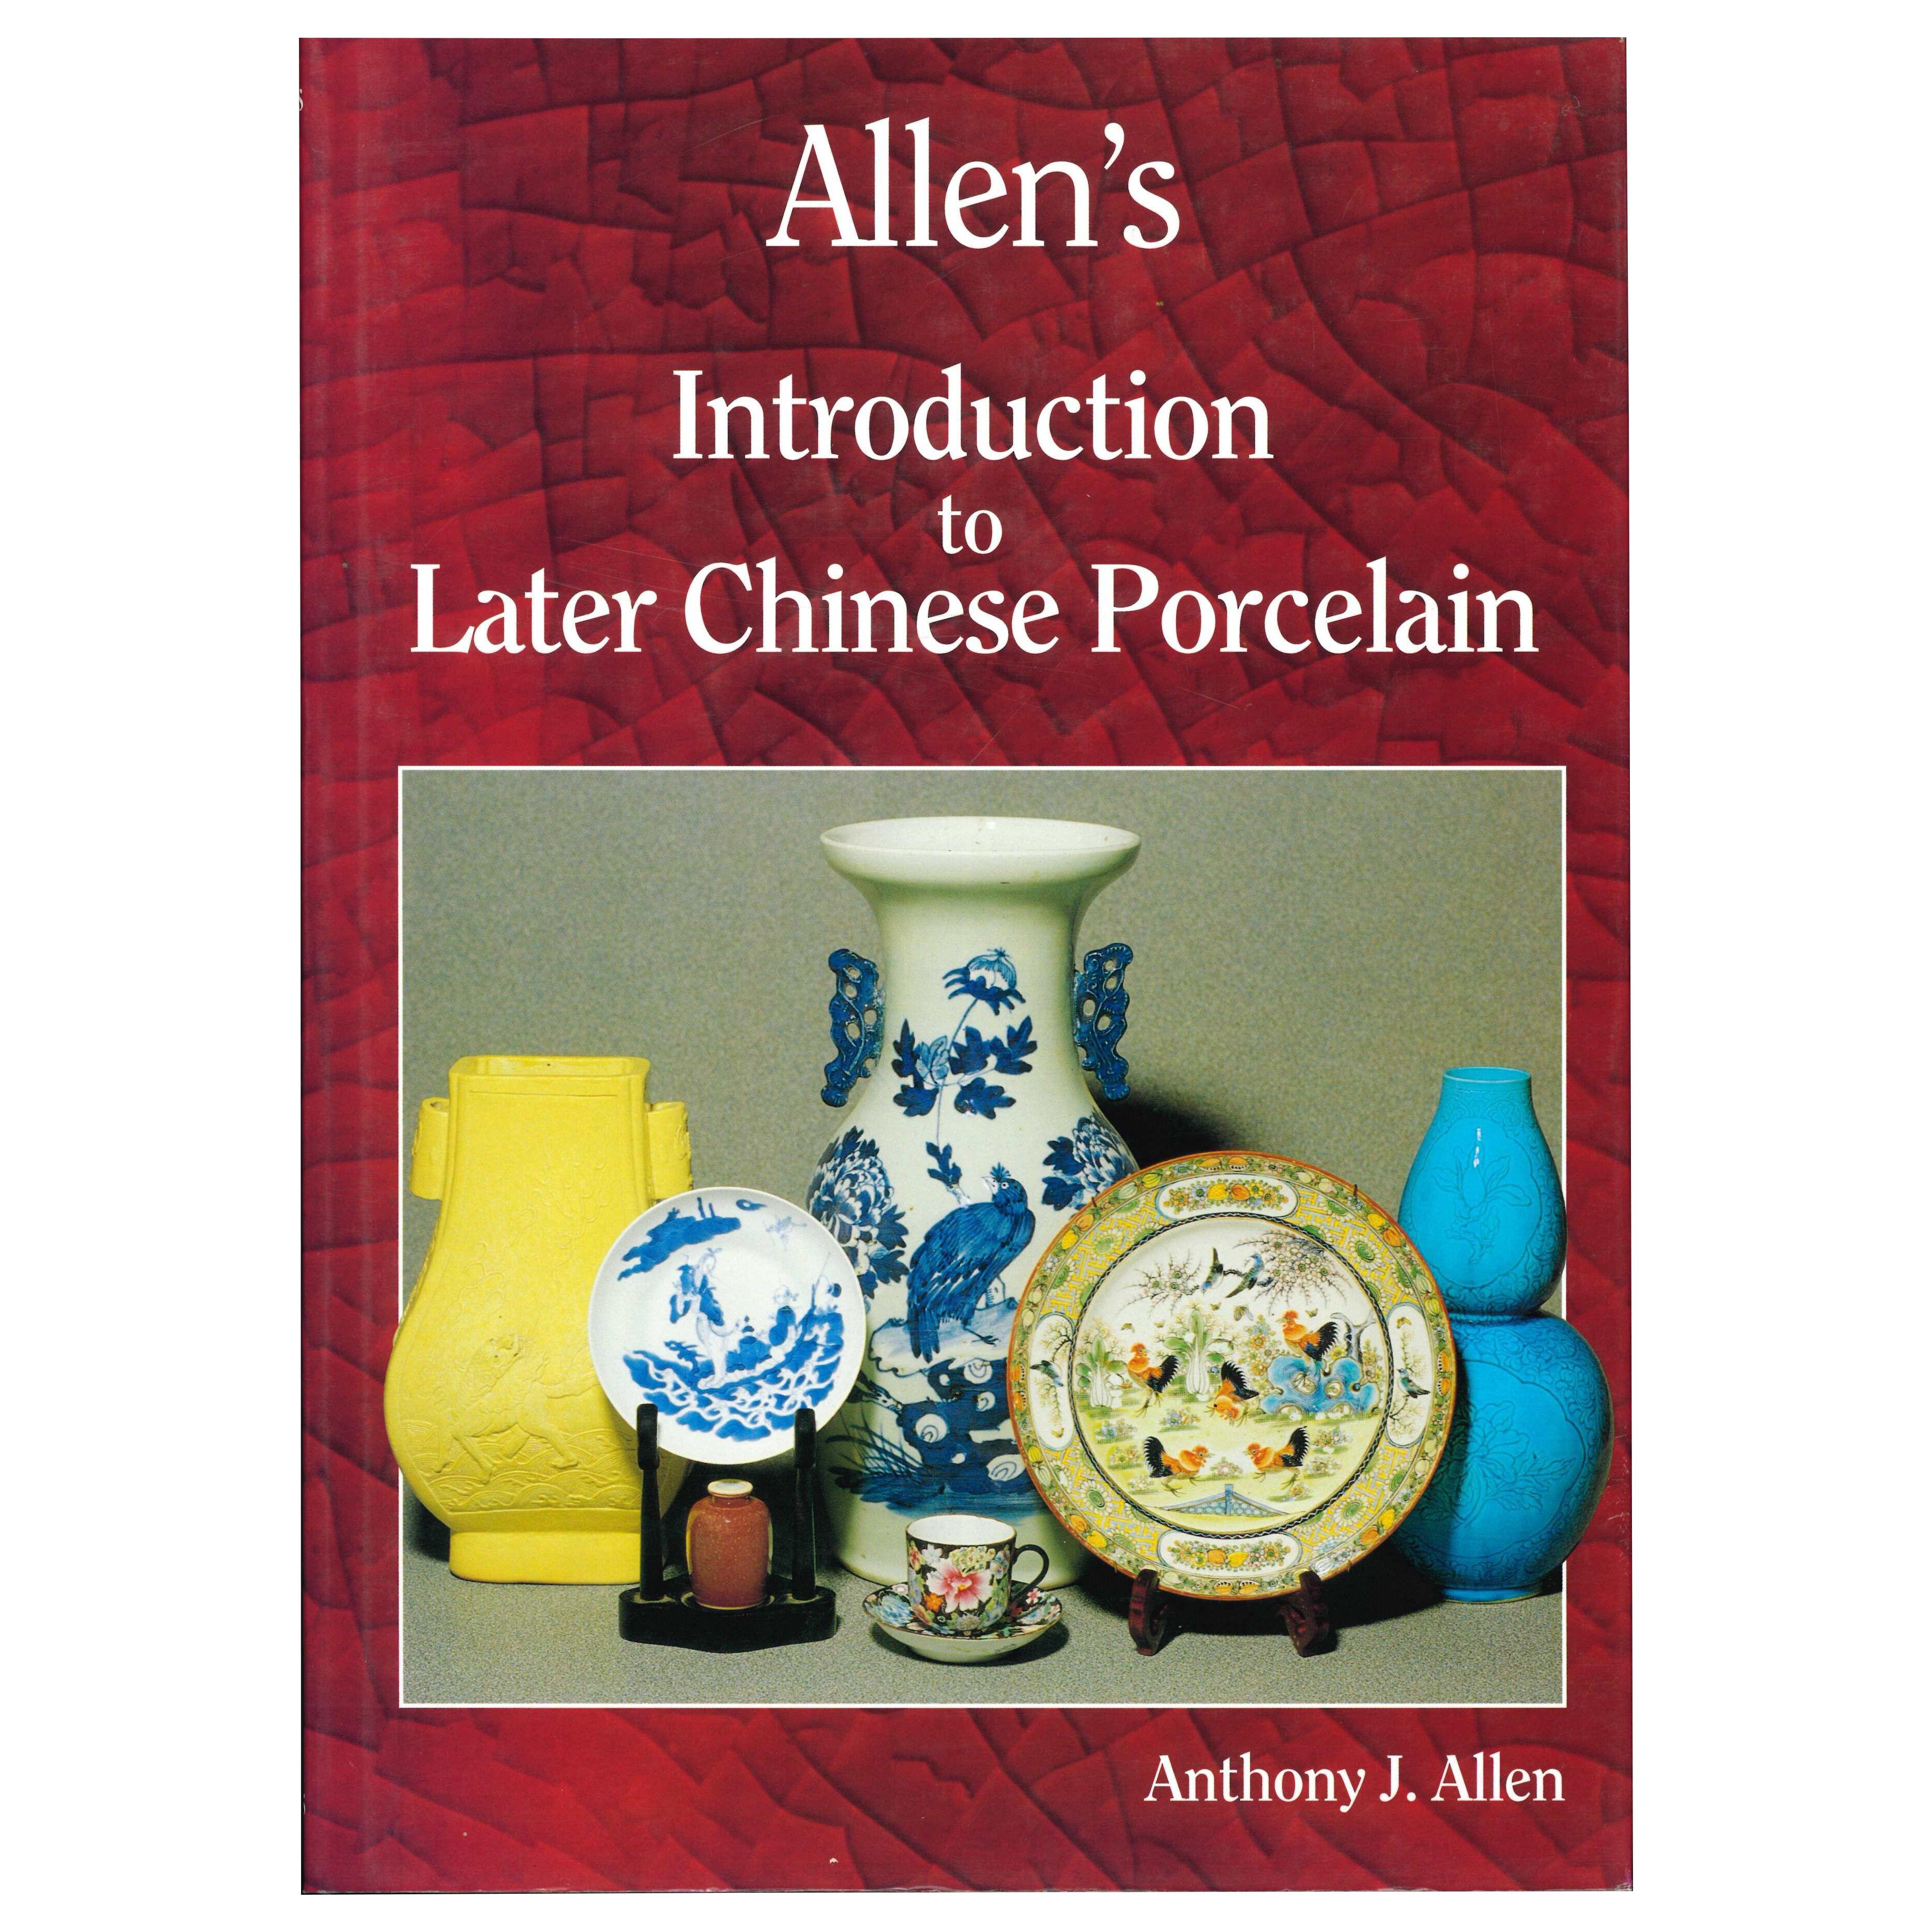 ALLEN'S - INTRODUCTION TO LATER CHINESE PORCELAIN (book)